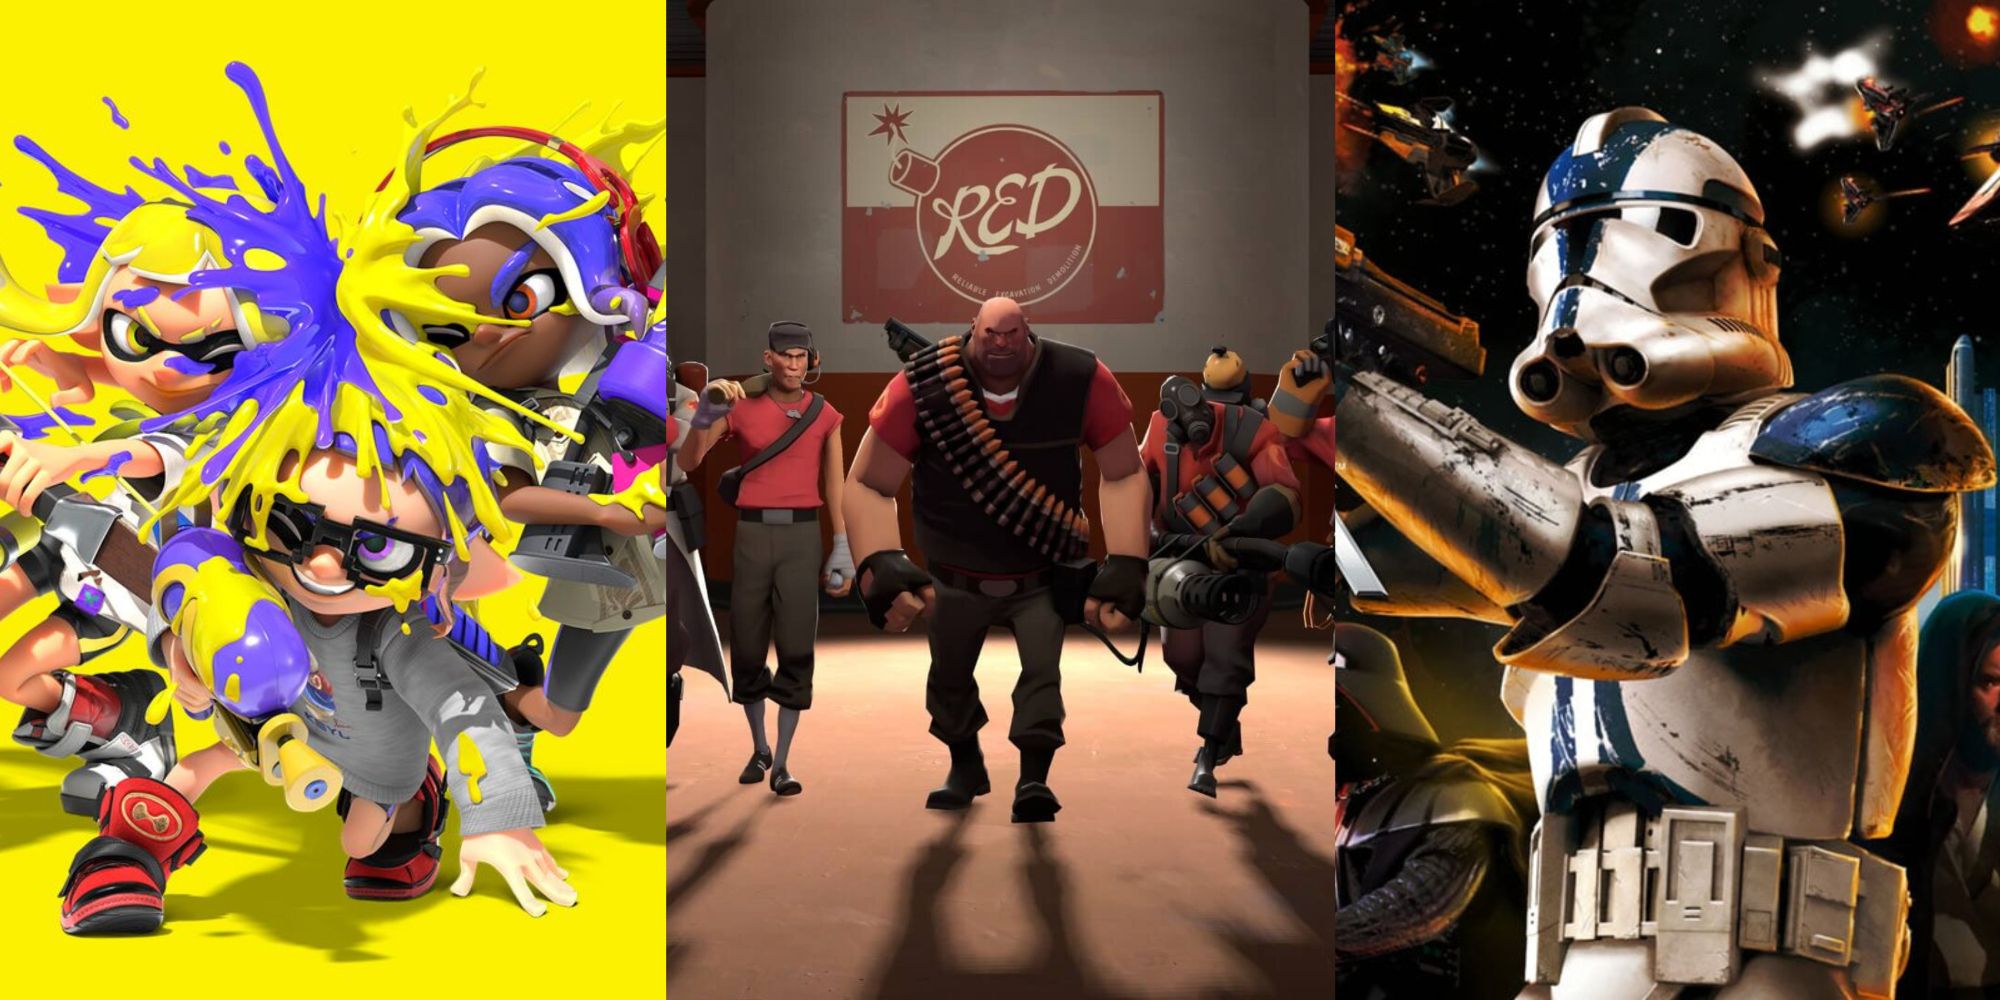 Splatoon characters, Team Fortress 2 characters, and a Clone Trooper